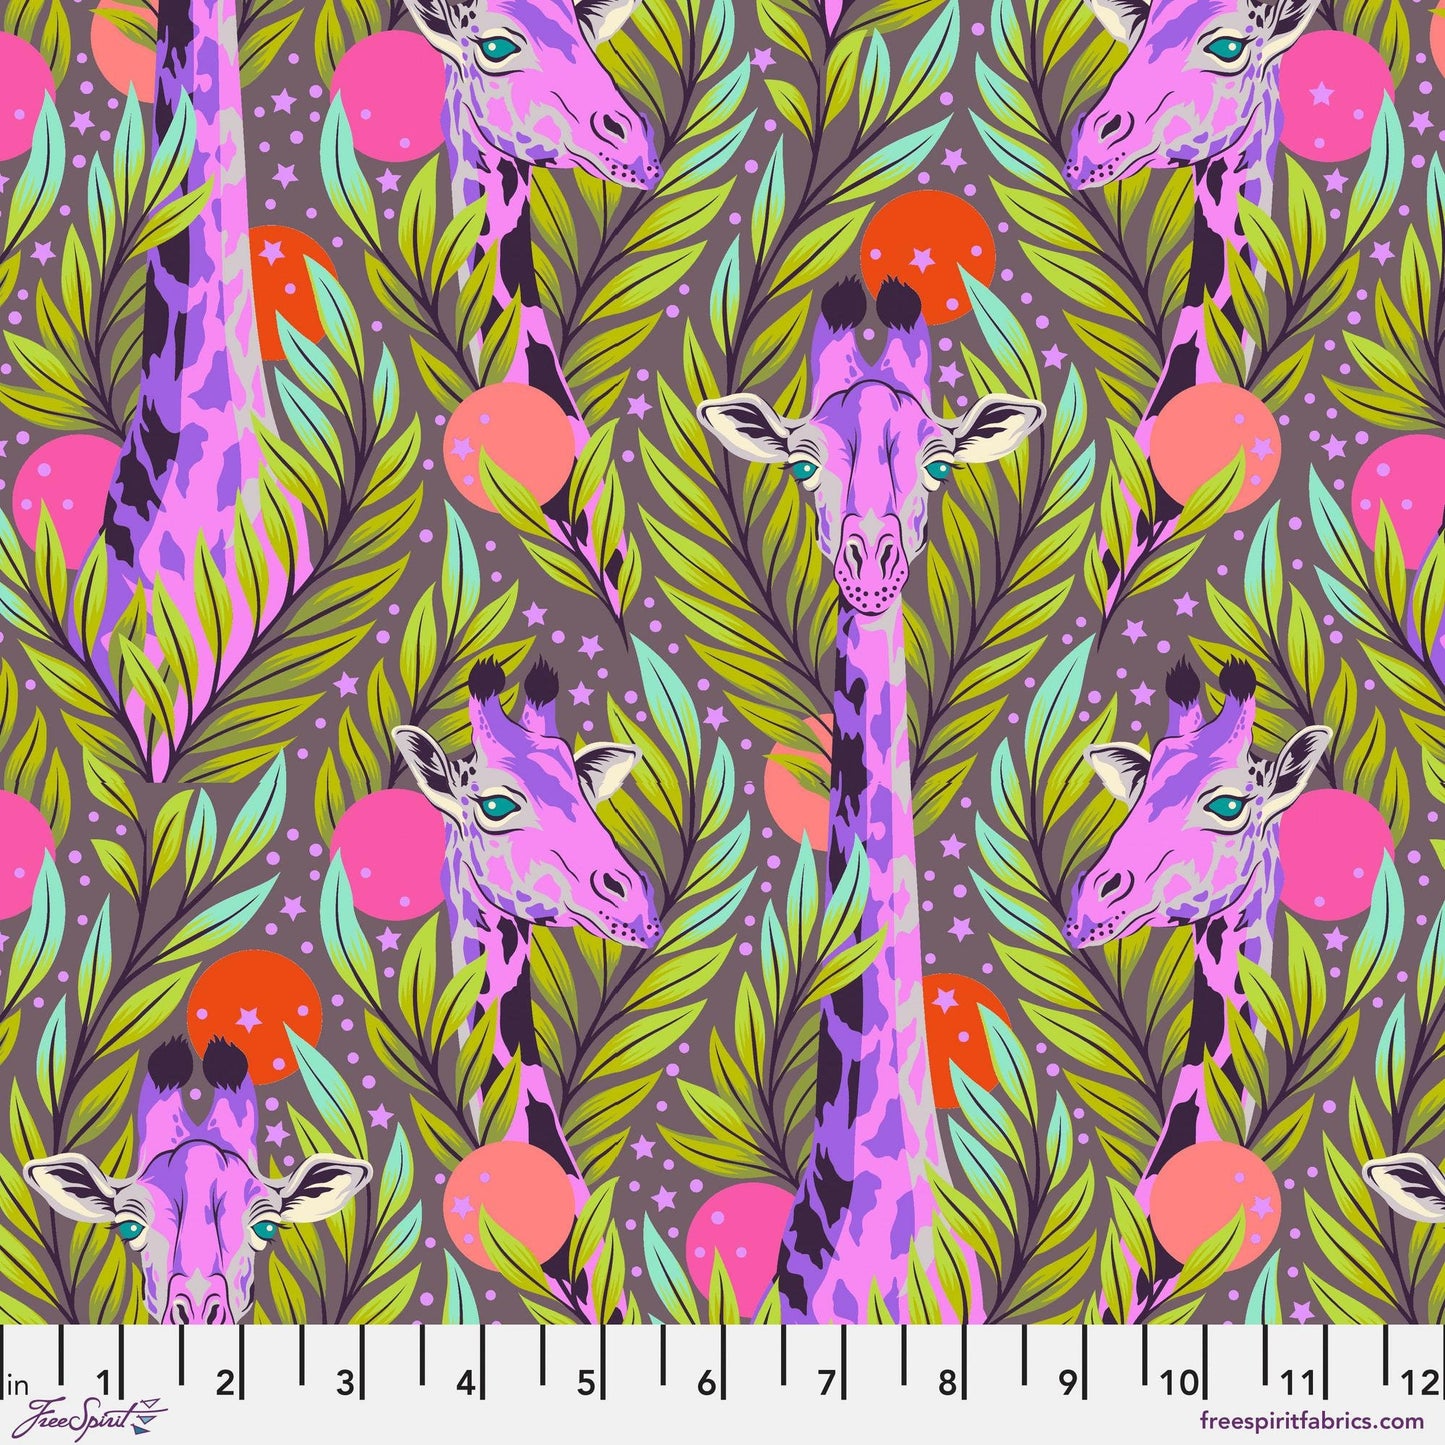 Neck for Days Mystic Everglow Tula Pink Freespirit Fabrics 100% Quilters Cotton SHIPPING NOW Fabric Fetish